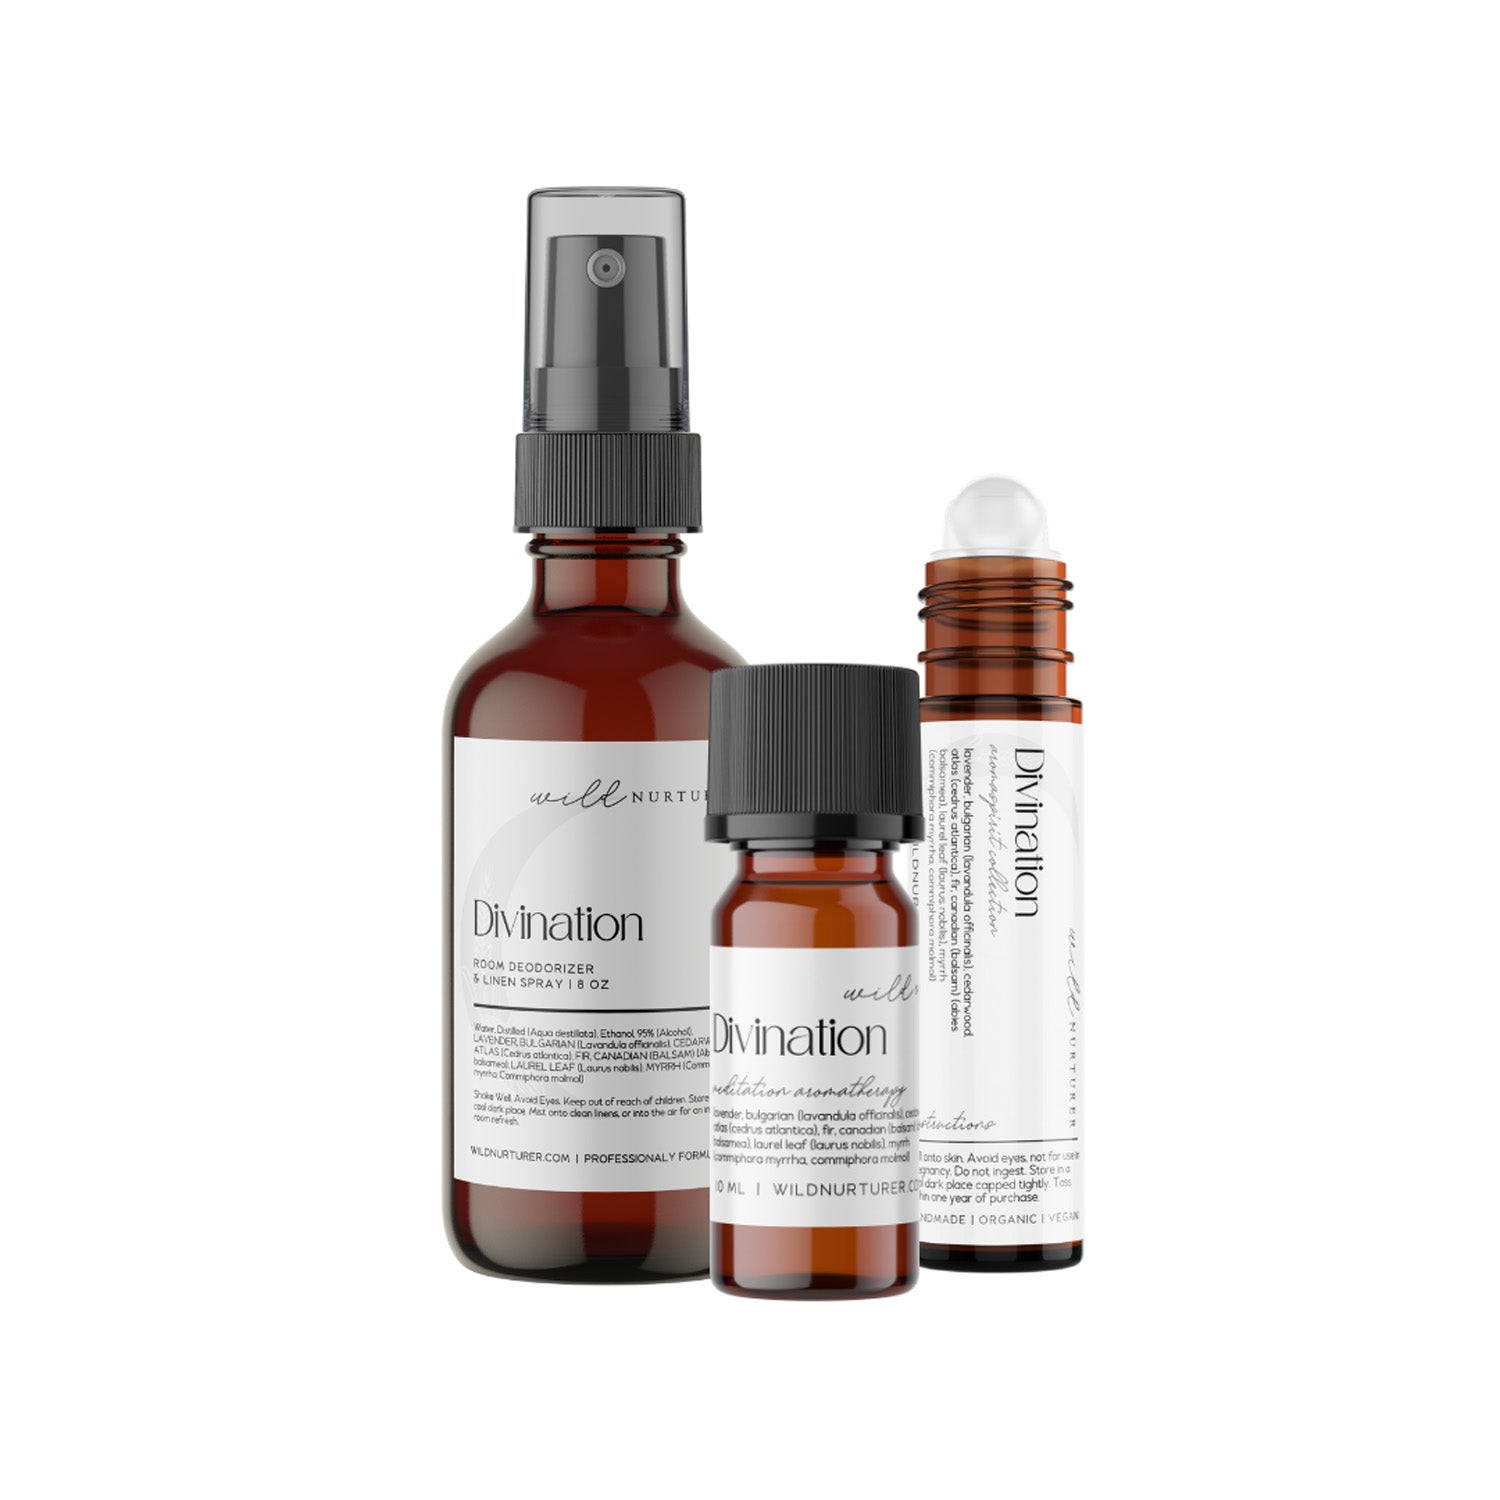 Two bottles of Practical Magic Collection by Wild Nurturer Aromatherapy skincare products, one with a spray nozzle and another with a dropper, isolated on a white background.